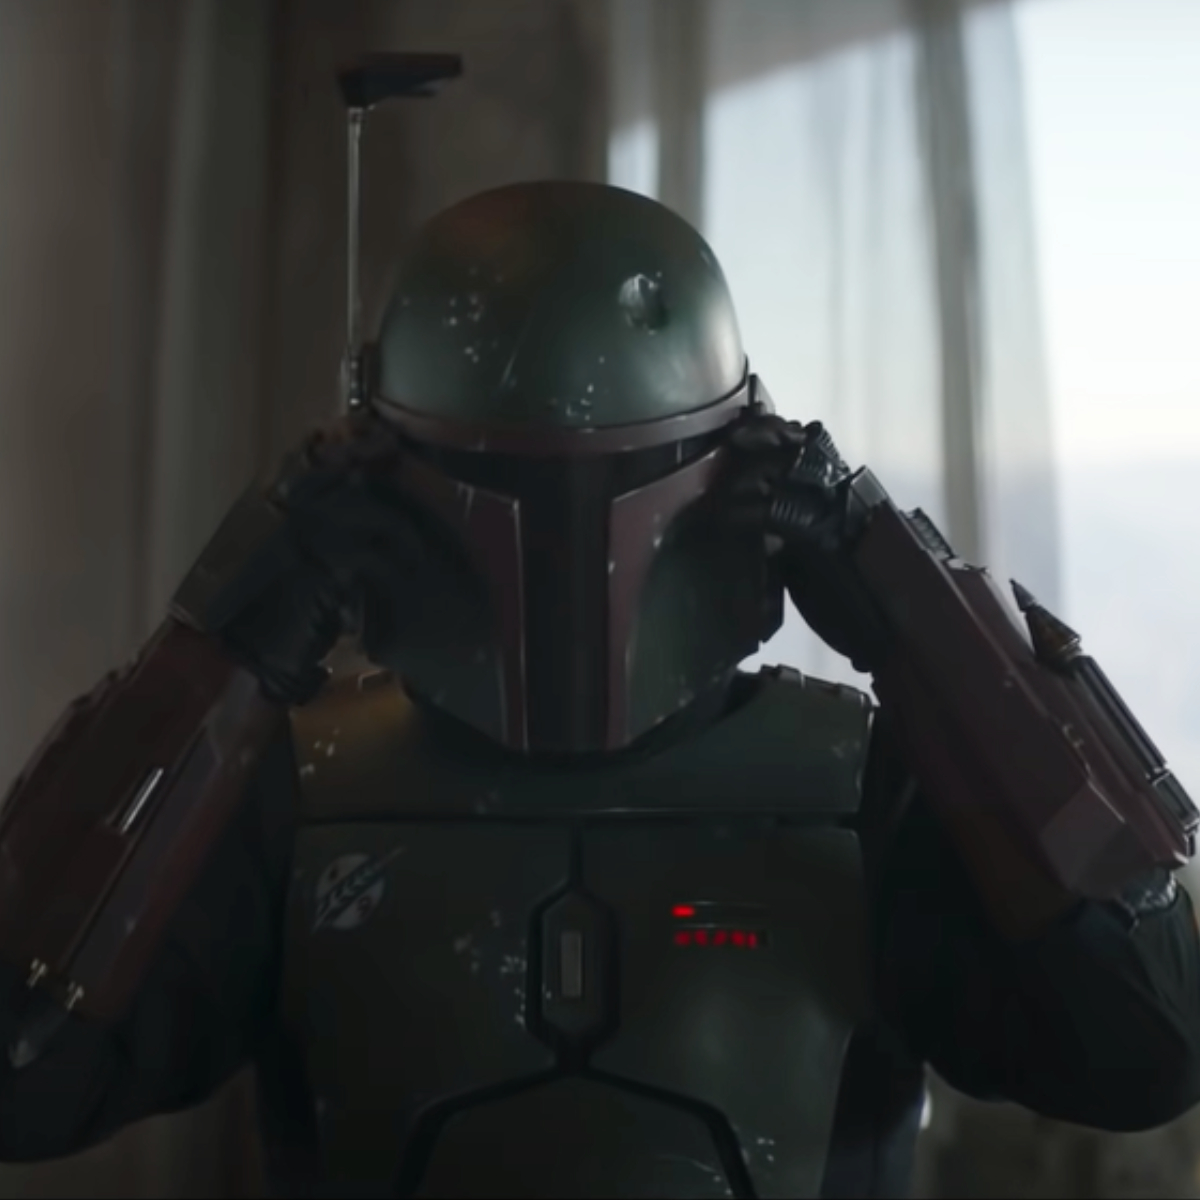 The Book of Boba Fett Season 1 Ep 1 Review: Temuera Morrison as a tough crime lord offers mediocre beginning